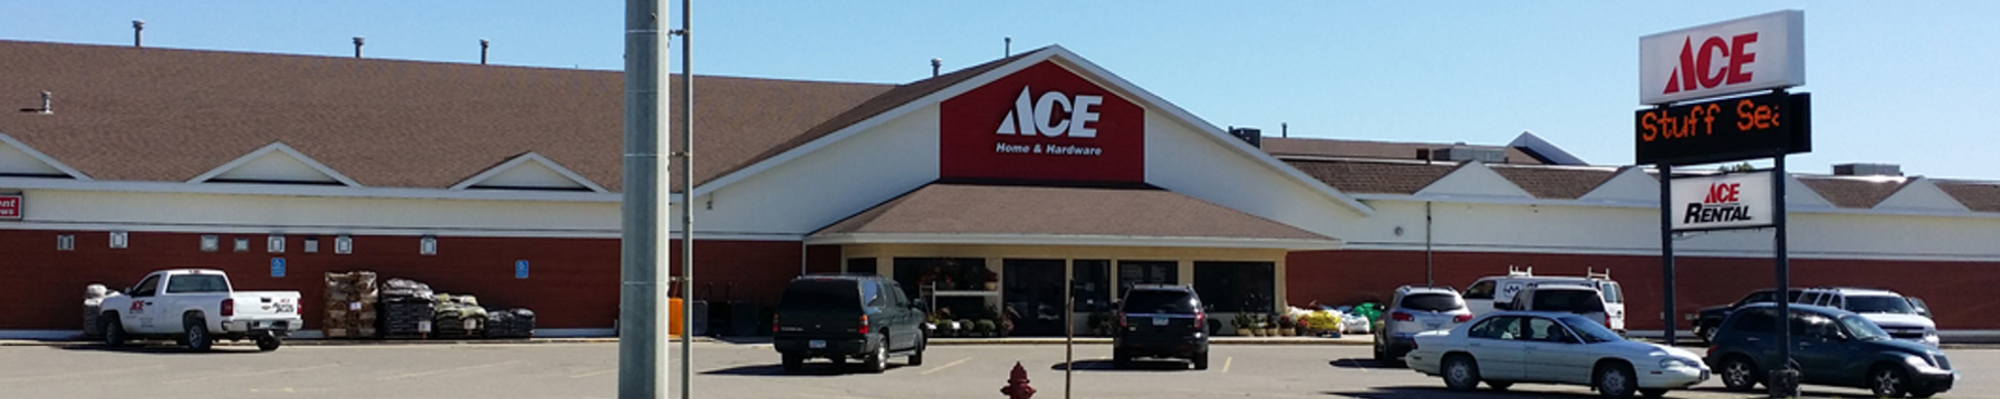 About Ace Home & Hardware in Marshall